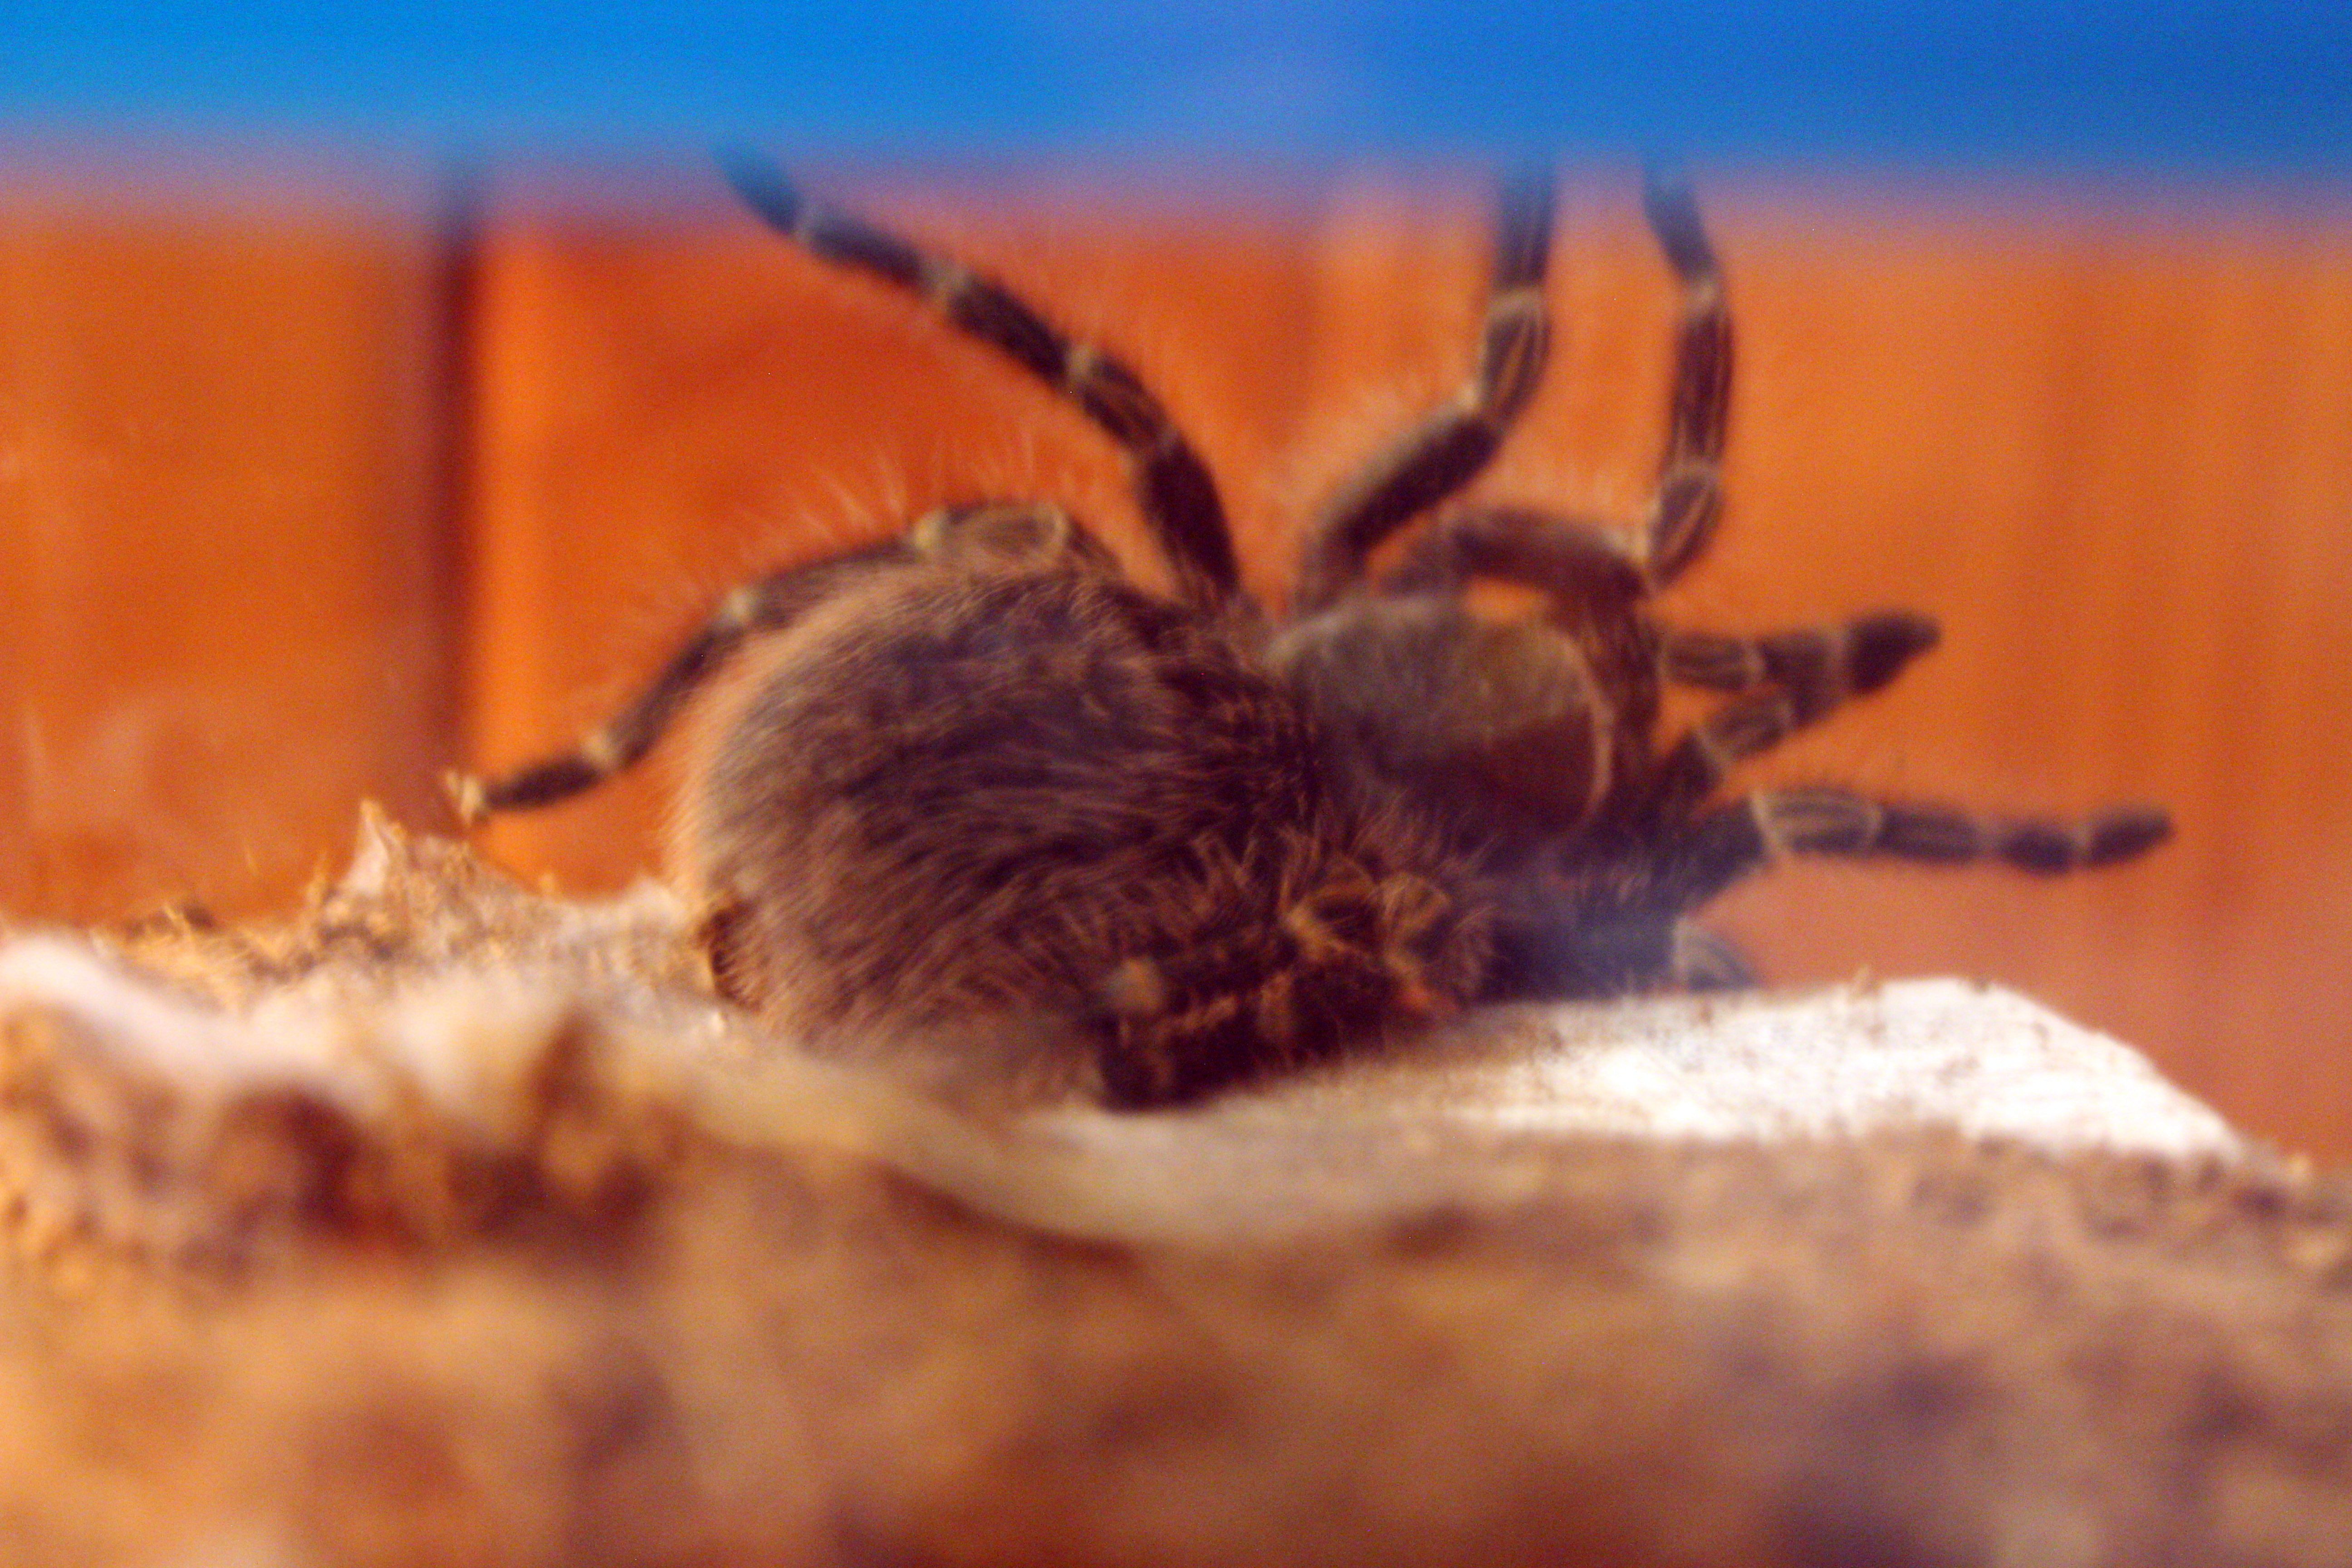 G. Pulchripes, ready to pop.